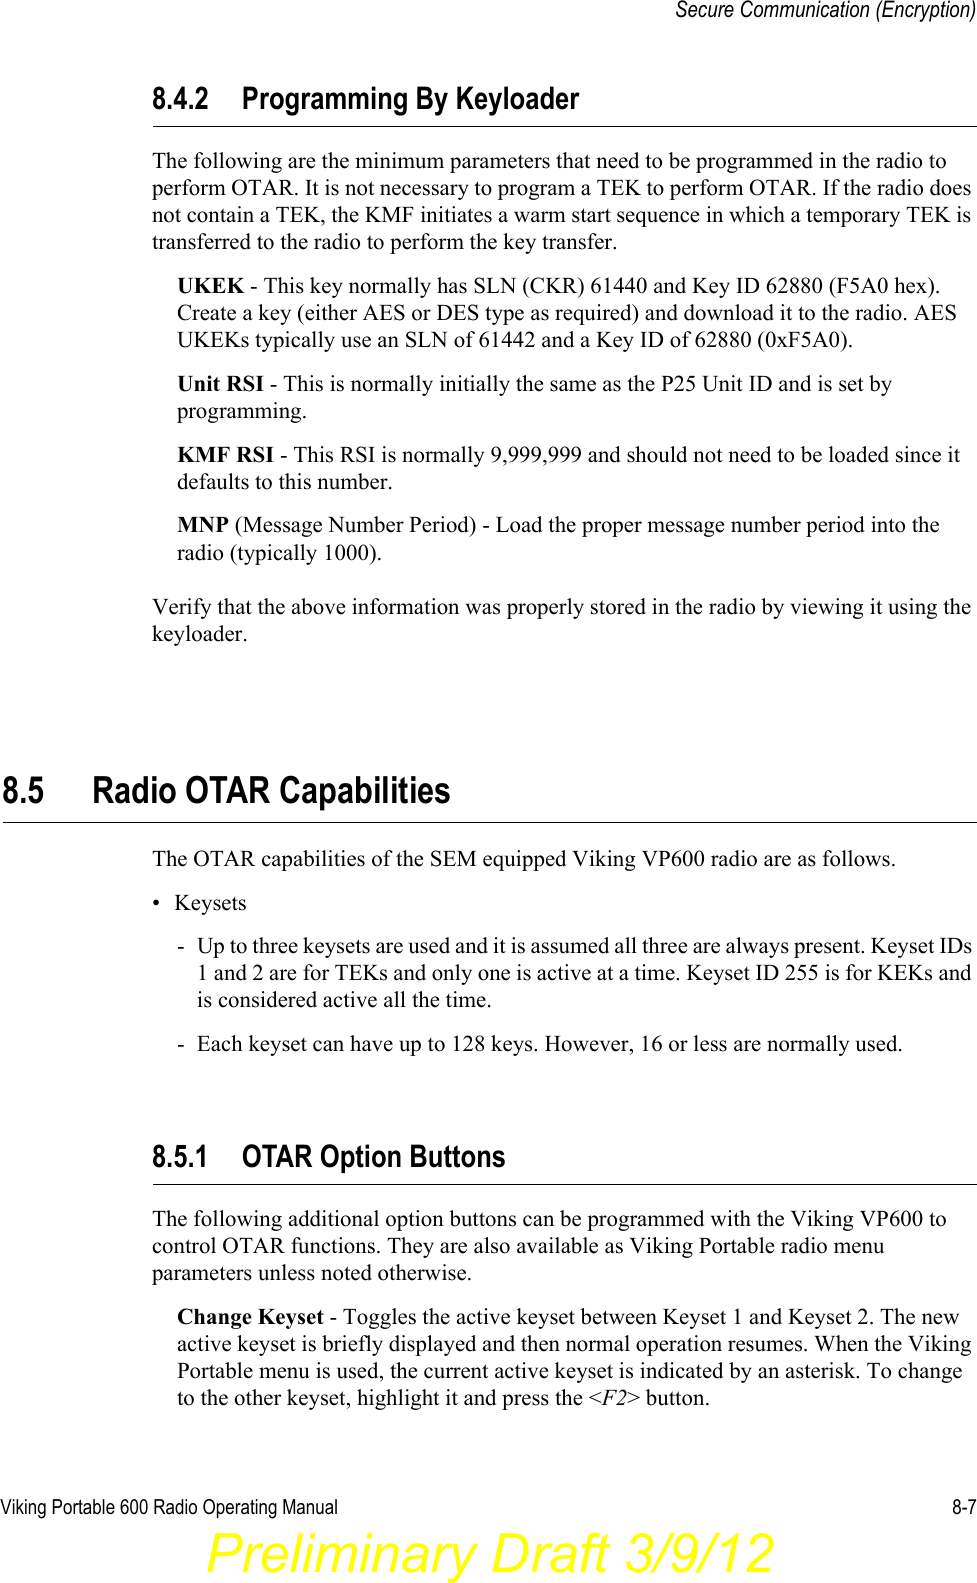 Viking Portable 600 Radio Operating Manual 8-7Secure Communication (Encryption)8.4.2 Programming By KeyloaderThe following are the minimum parameters that need to be programmed in the radio to perform OTAR. It is not necessary to program a TEK to perform OTAR. If the radio does not contain a TEK, the KMF initiates a warm start sequence in which a temporary TEK is transferred to the radio to perform the key transfer.UKEK - This key normally has SLN (CKR) 61440 and Key ID 62880 (F5A0 hex). Create a key (either AES or DES type as required) and download it to the radio. AES UKEKs typically use an SLN of 61442 and a Key ID of 62880 (0xF5A0).Unit RSI - This is normally initially the same as the P25 Unit ID and is set by programming.KMF RSI - This RSI is normally 9,999,999 and should not need to be loaded since it defaults to this number.MNP (Message Number Period) - Load the proper message number period into the radio (typically 1000).Verify that the above information was properly stored in the radio by viewing it using the keyloader.8.5 Radio OTAR CapabilitiesThe OTAR capabilities of the SEM equipped Viking VP600 radio are as follows. • Keysets- Up to three keysets are used and it is assumed all three are always present. Keyset IDs 1 and 2 are for TEKs and only one is active at a time. Keyset ID 255 is for KEKs and is considered active all the time.- Each keyset can have up to 128 keys. However, 16 or less are normally used.8.5.1 OTAR Option ButtonsThe following additional option buttons can be programmed with the Viking VP600 to control OTAR functions. They are also available as Viking Portable radio menu parameters unless noted otherwise.Change Keyset - Toggles the active keyset between Keyset 1 and Keyset 2. The new active keyset is briefly displayed and then normal operation resumes. When the Viking Portable menu is used, the current active keyset is indicated by an asterisk. To change to the other keyset, highlight it and press the &lt;F2&gt; button.Preliminary Draft 3/9/12